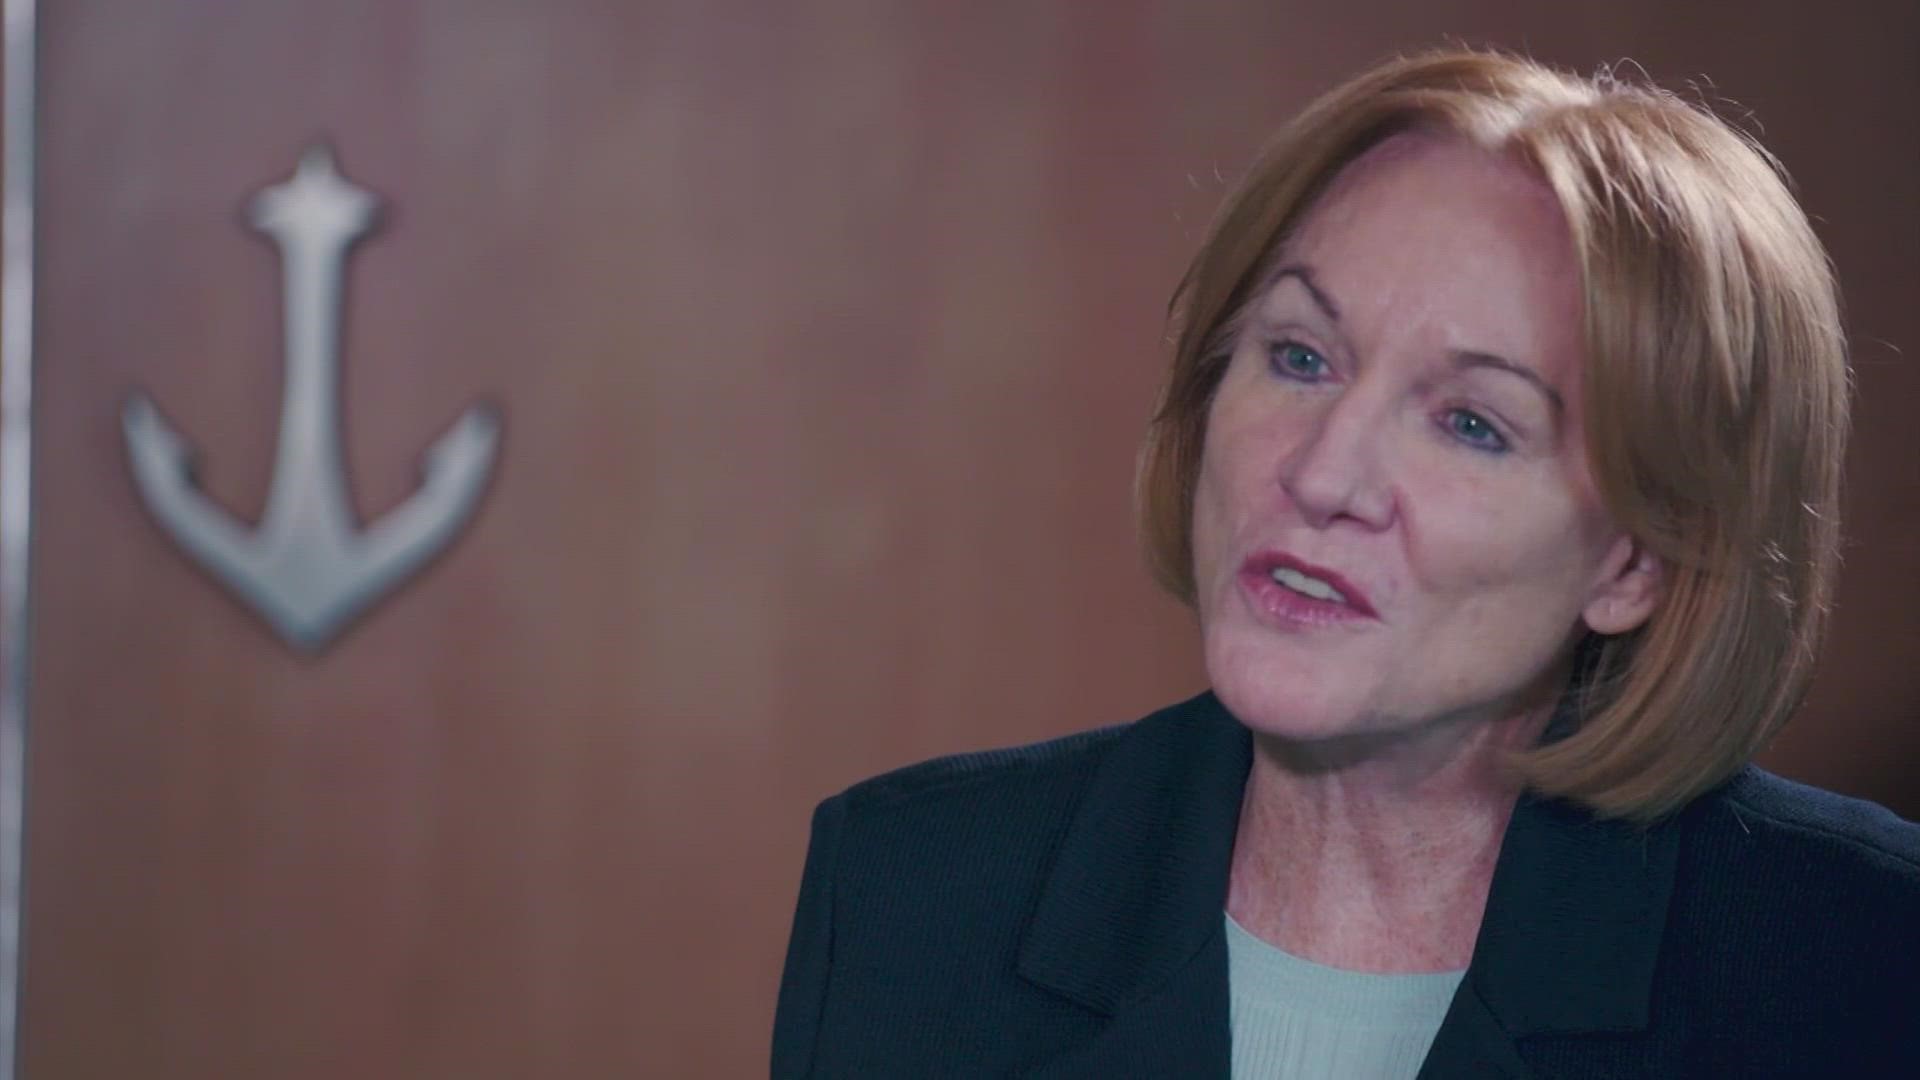 Reflecting on the pandemic and protests of summer 2020, Mayor Durkan said it was one of the most challenging periods of time she's ever been through.